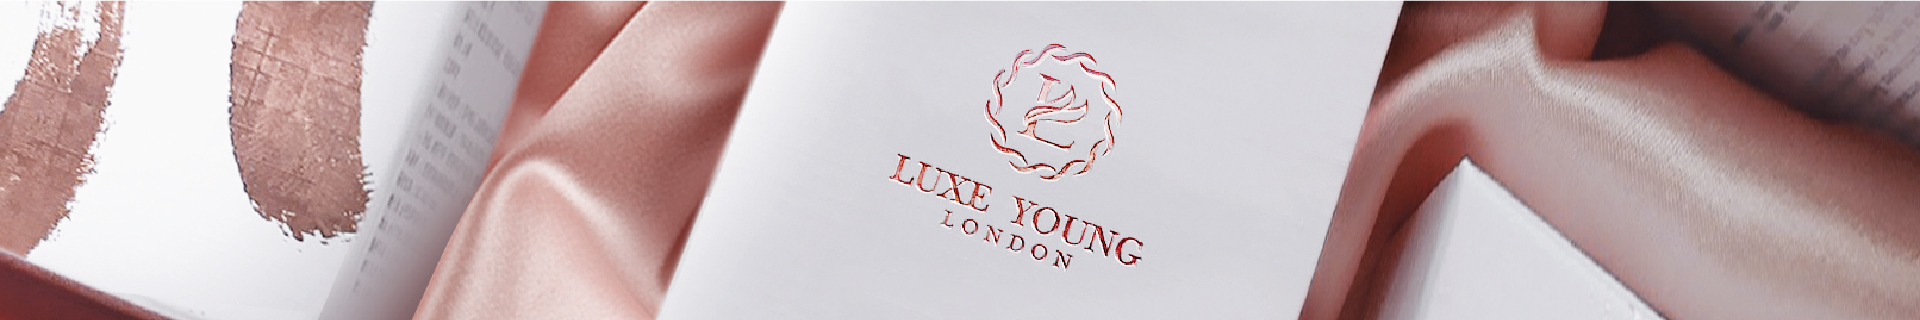 Luxe Young Official Store